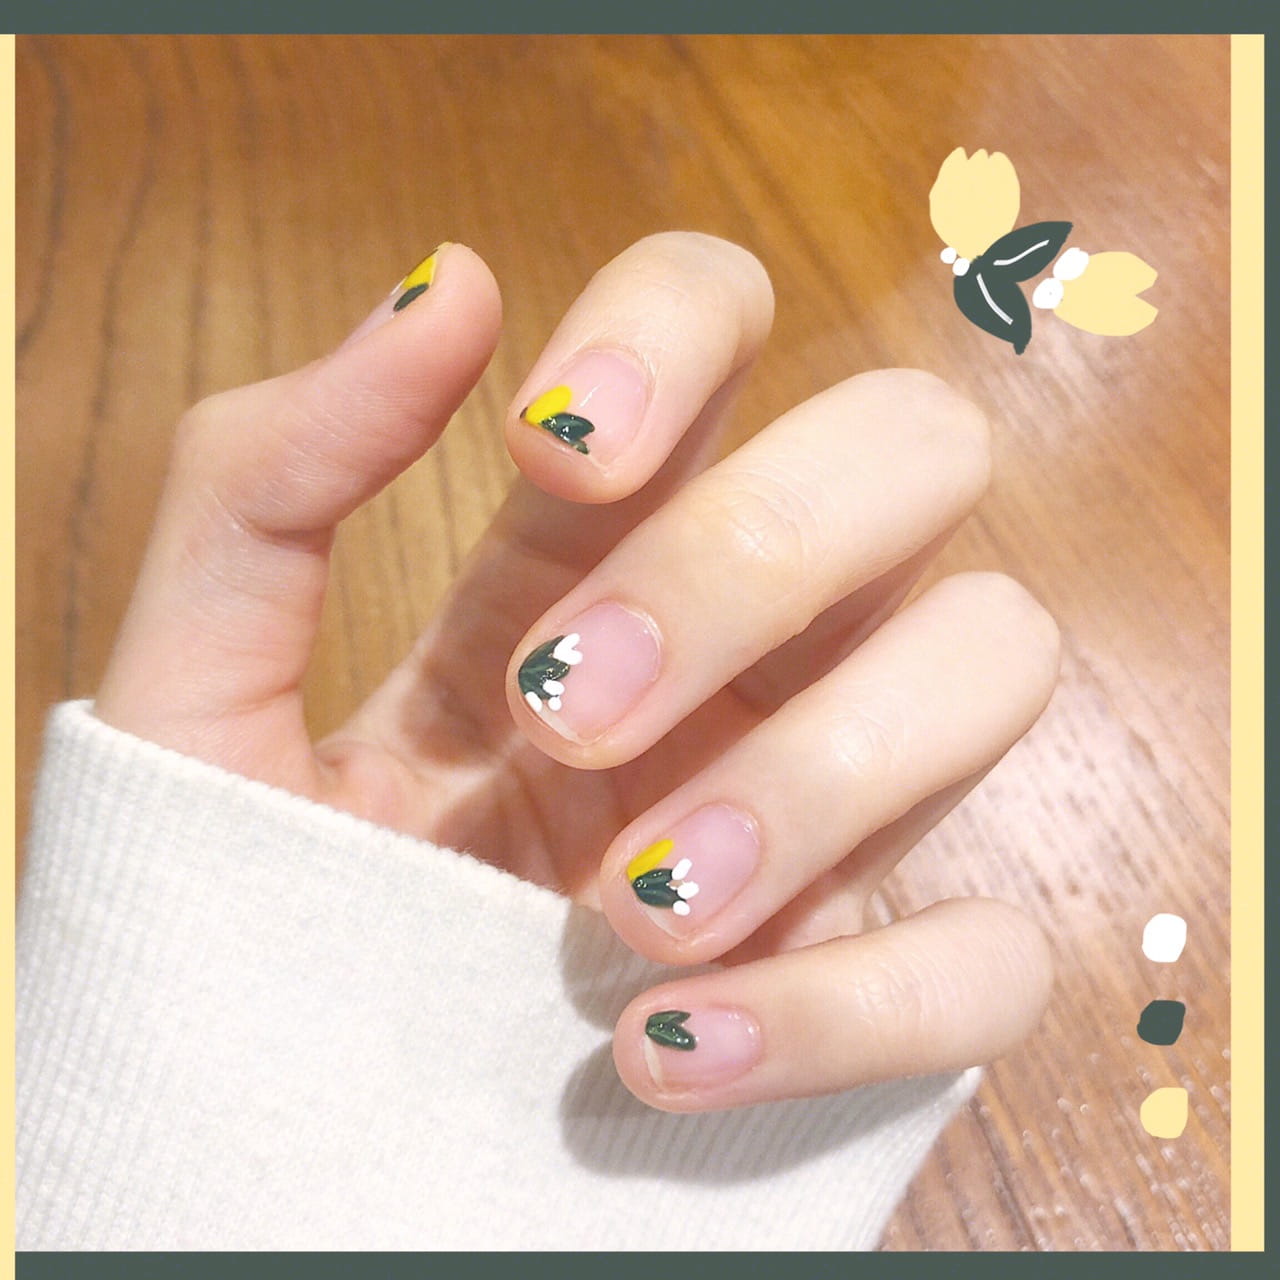 100+ Short Nail Designs You’ll Want To Try This Year images 36